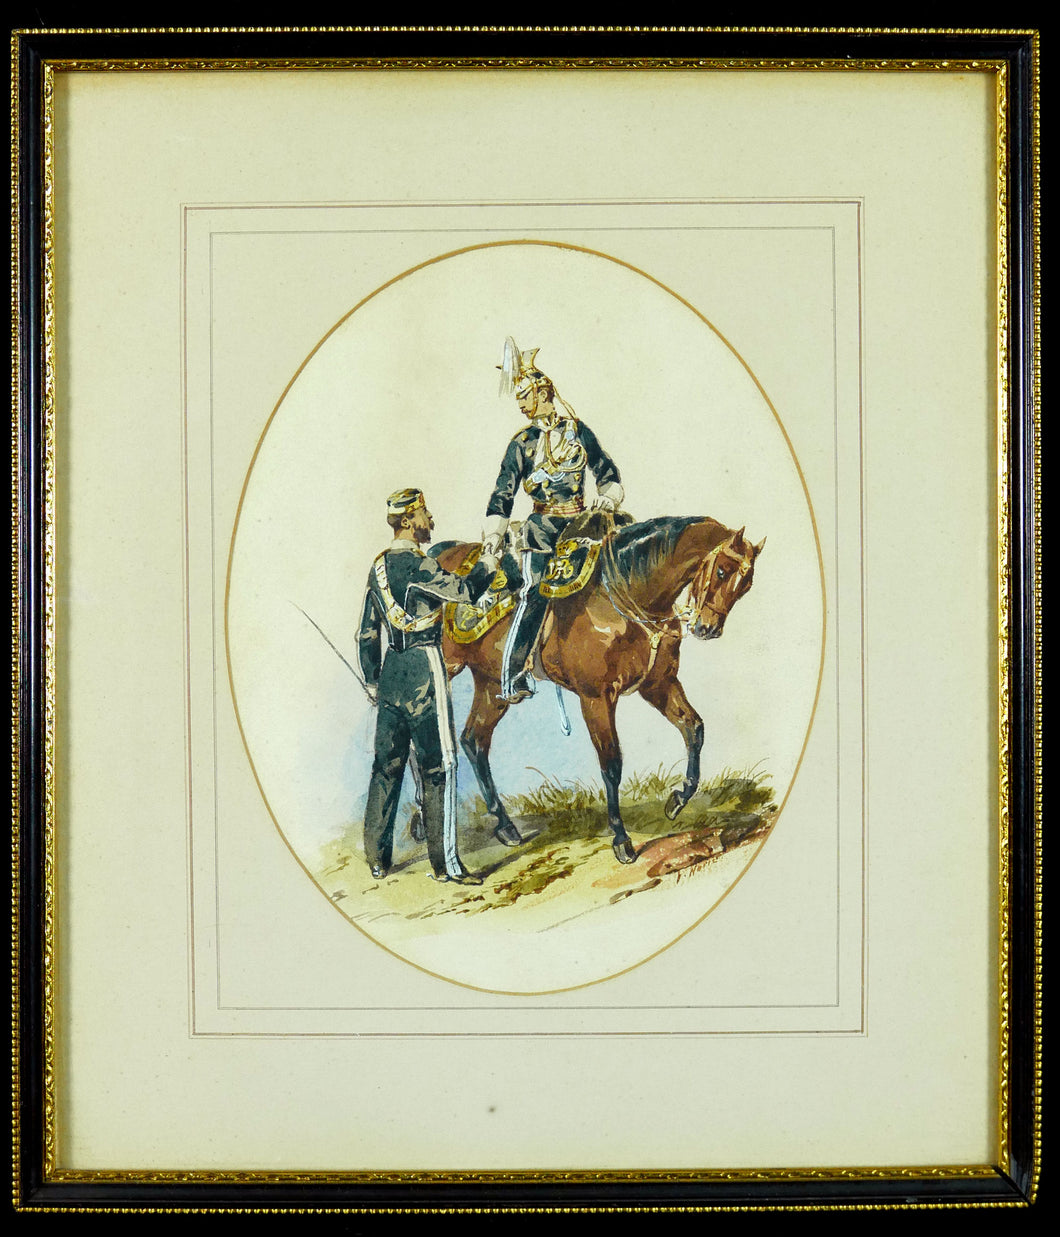 Orlando Norie (1832-1901) - Study of Two Officers of the 17th Lancers, 1865